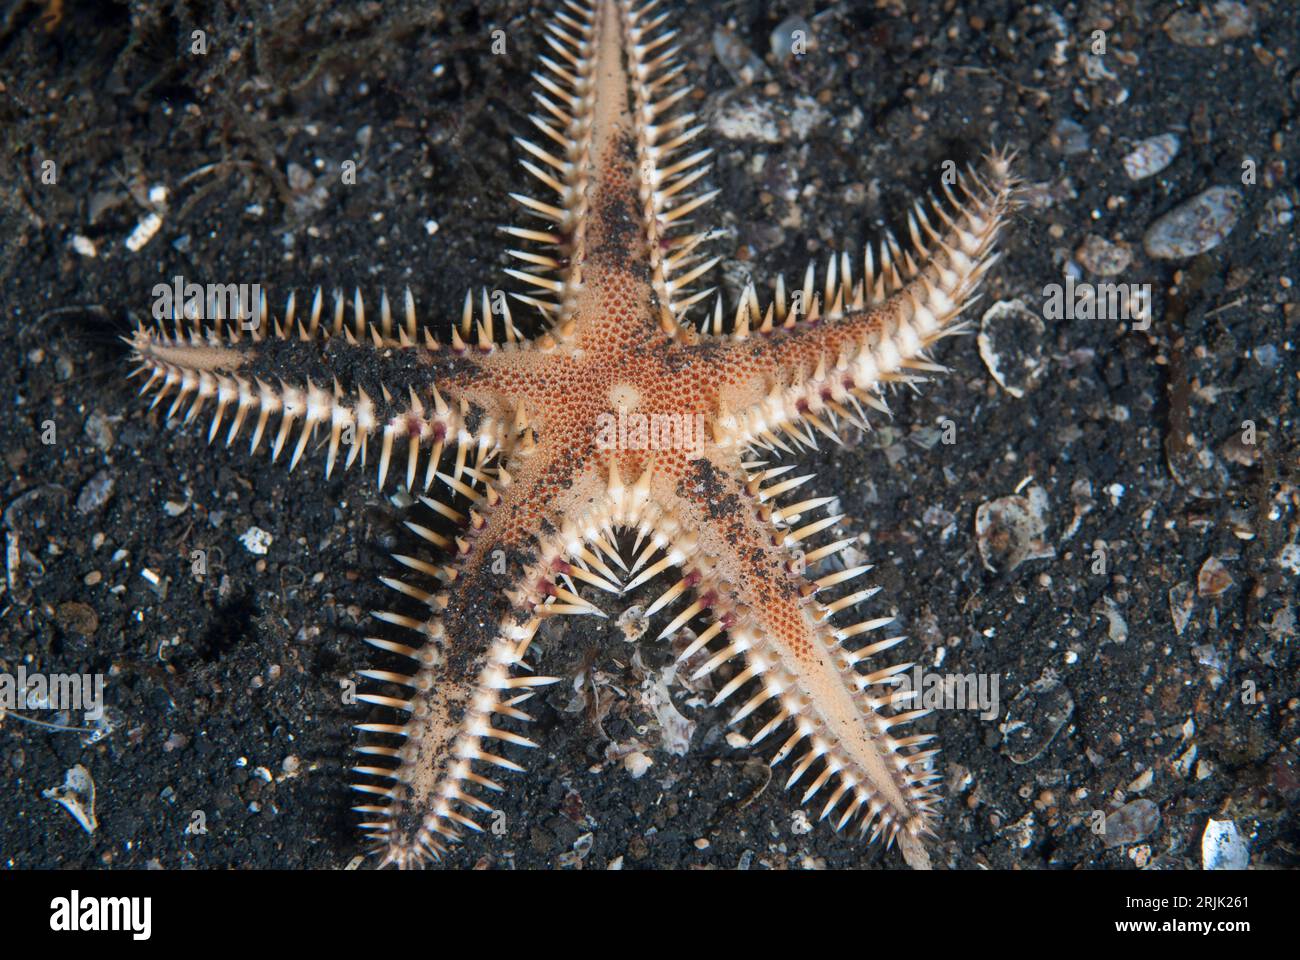 Sand Sifting Sea Star, Astropecten polyacanthus, on black sand, Night dive, TK1 dive site, Lembeh Straits, Sulawesi, Indonesia Stock Photo